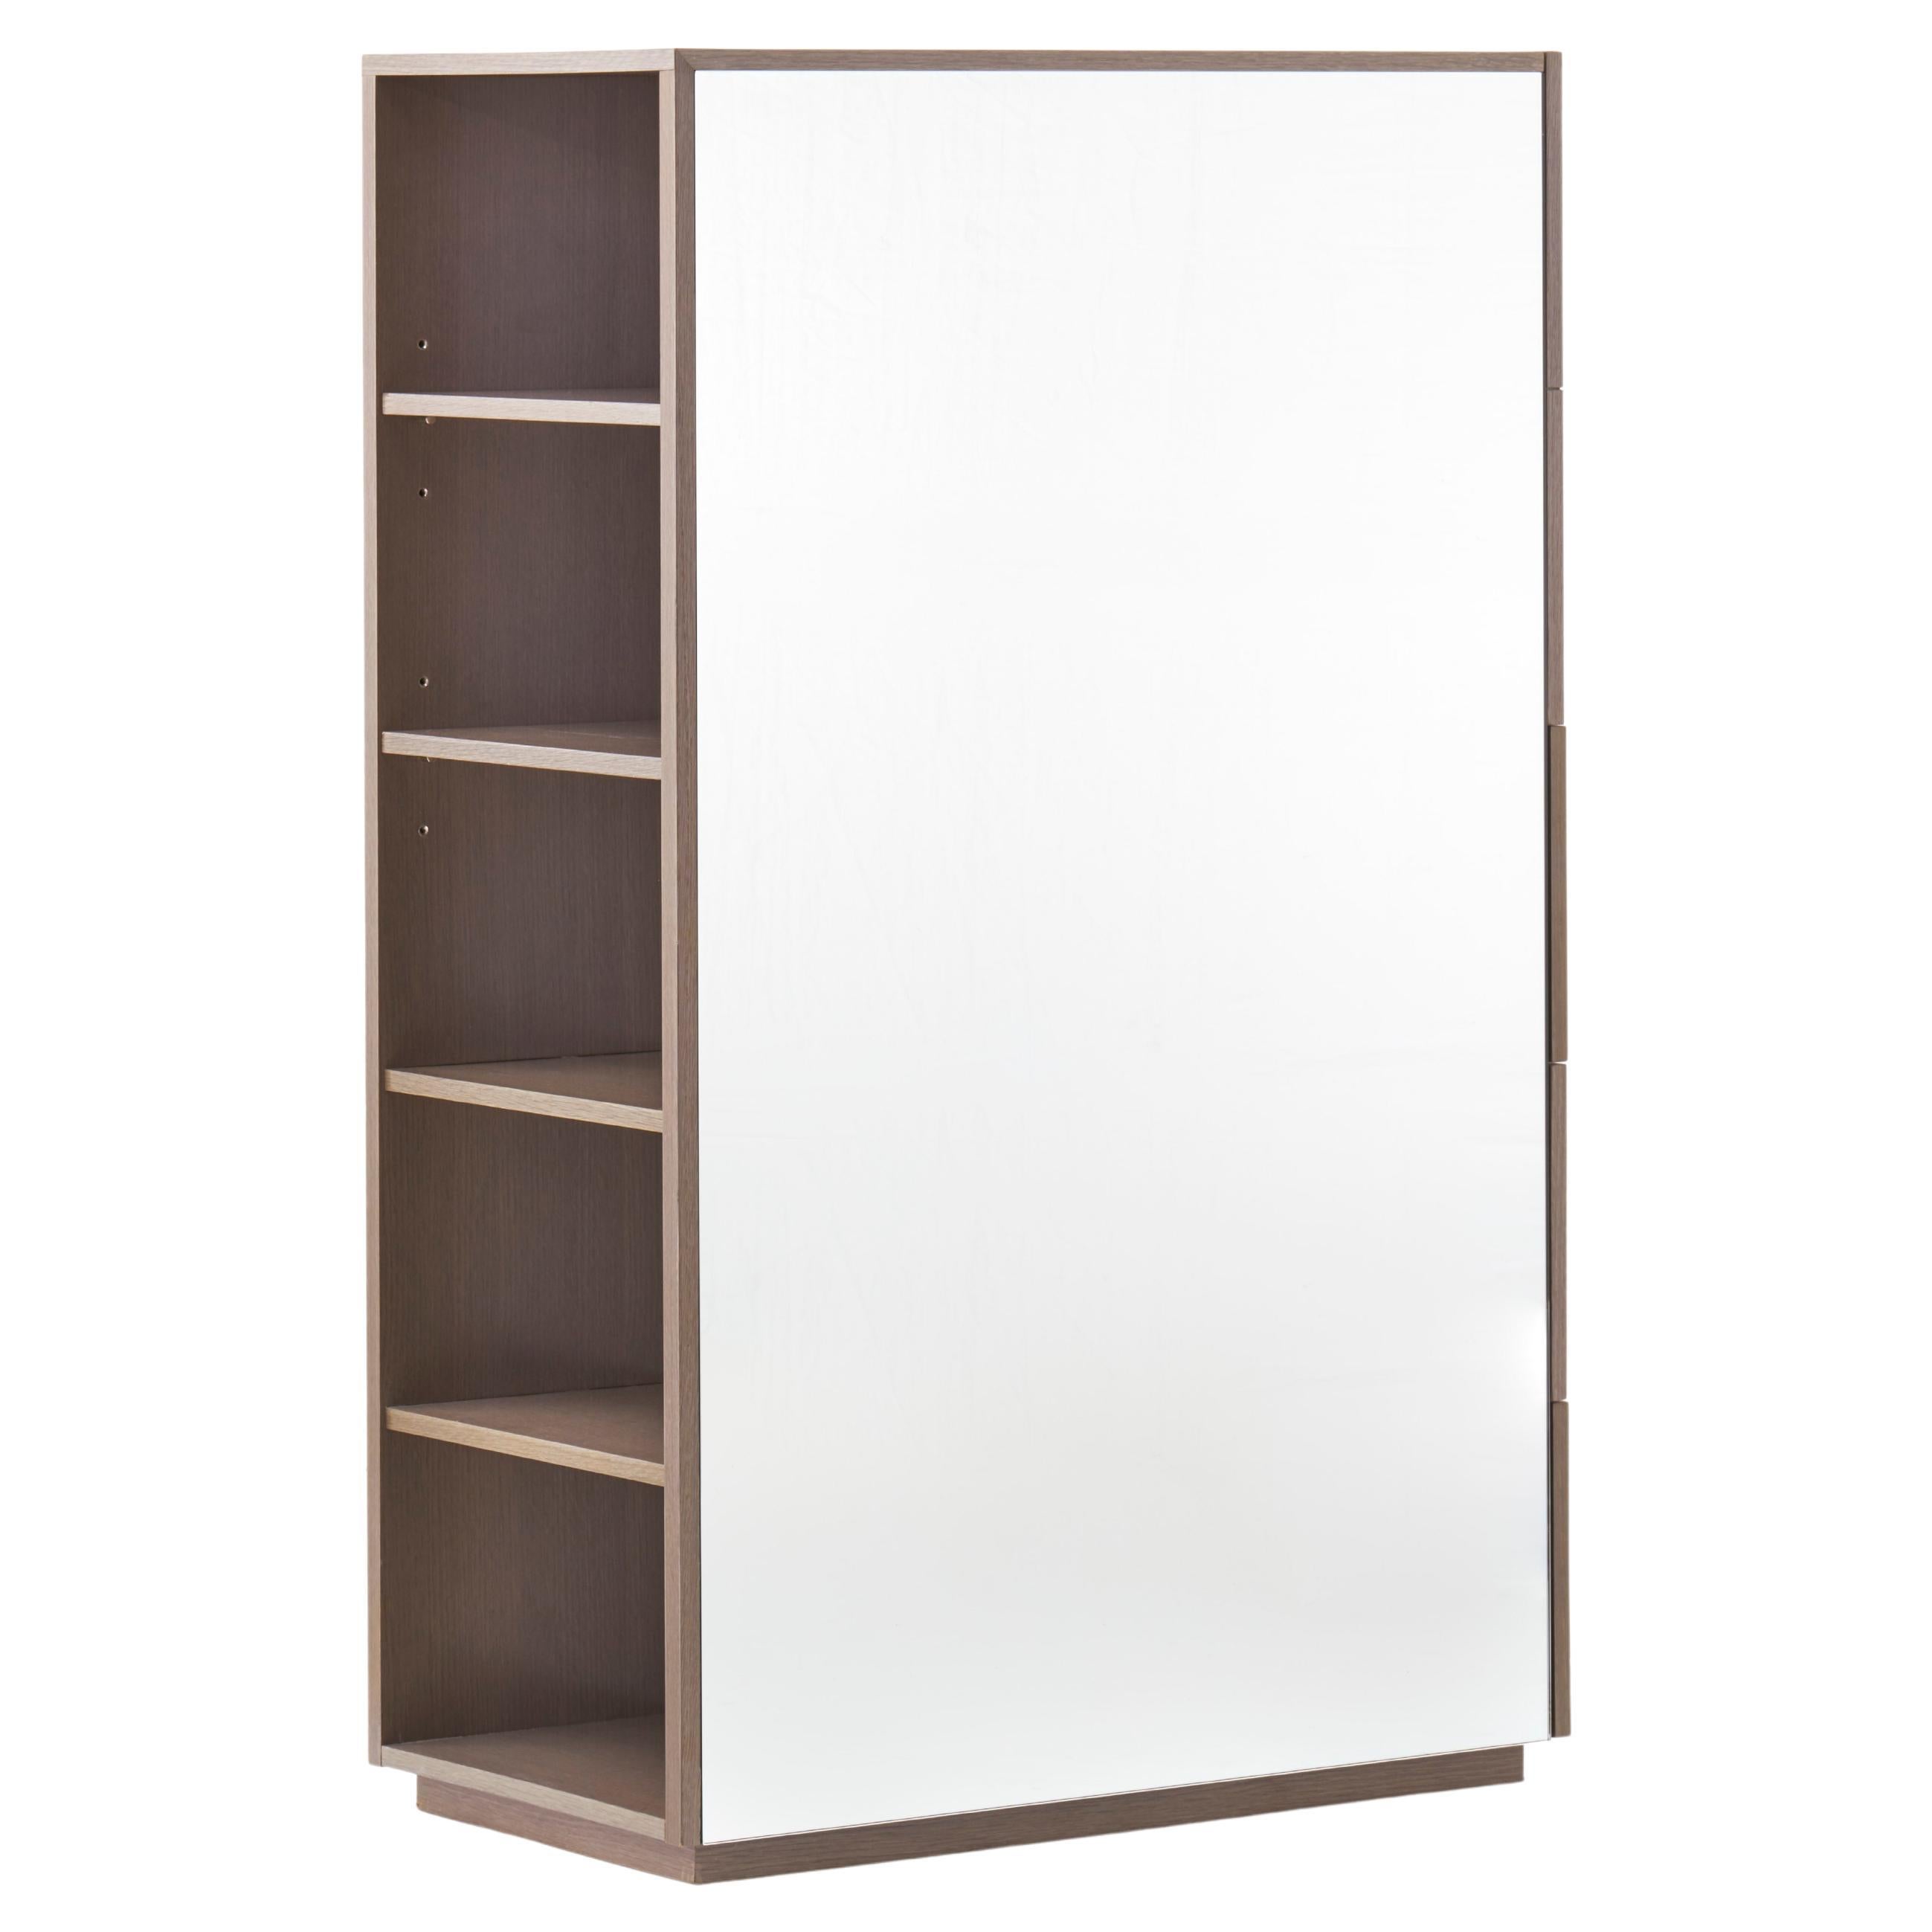 No. CG-001

The Mirrored Cabinet packs a lot of functions into one unit. Available with drawers or shelves accessible from the sides, it has a mirrored front and bacl, reflecting light and movement in the space. 

Its mirrored surfaces comes alive